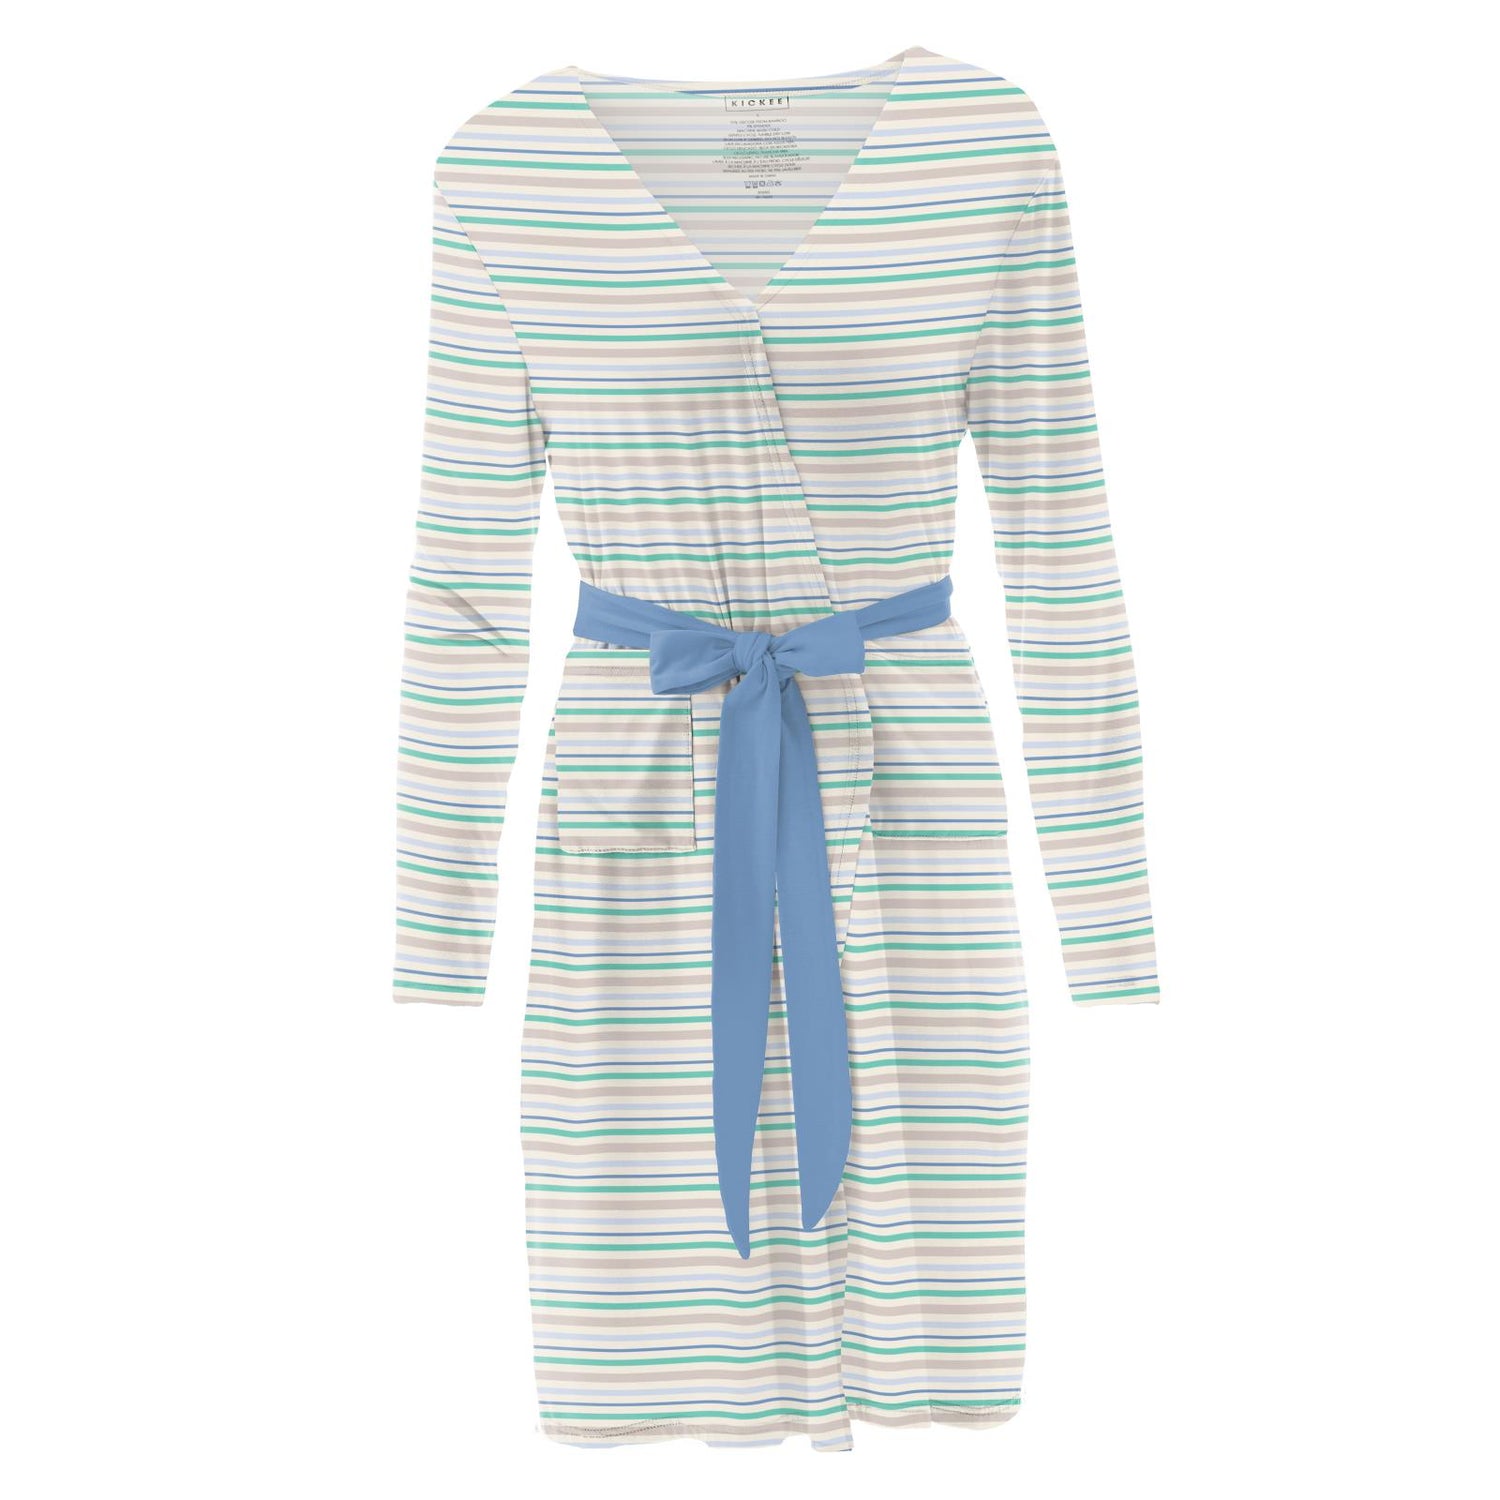 Women's Print Mid Length Lounge Robe in Mythical Stripe